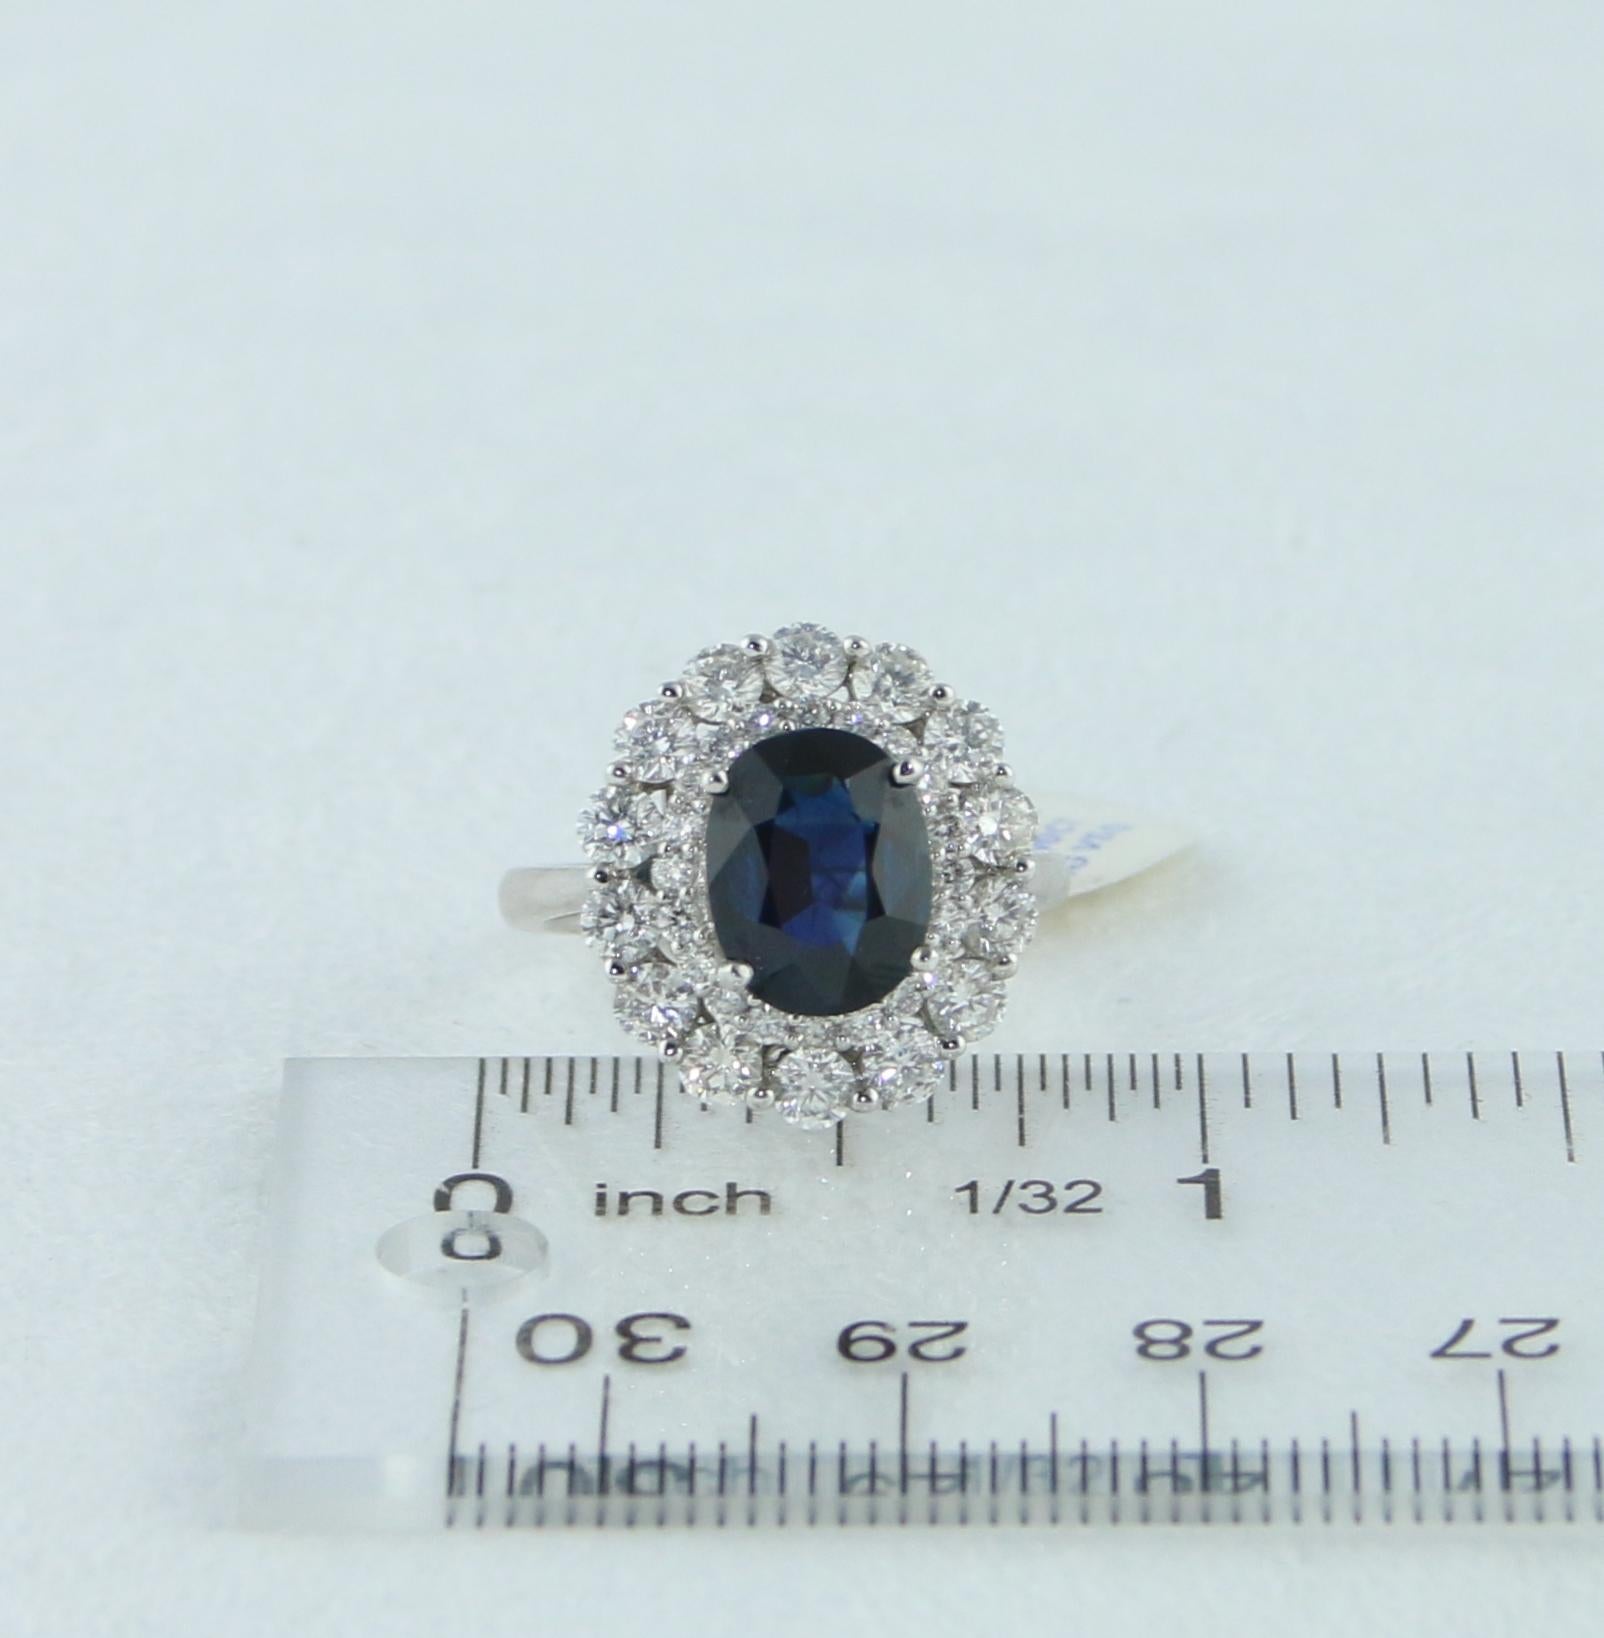 Certified No Heat 3.22 Carat Oval Blue Sapphire Diamond Gold Ring For Sale 3